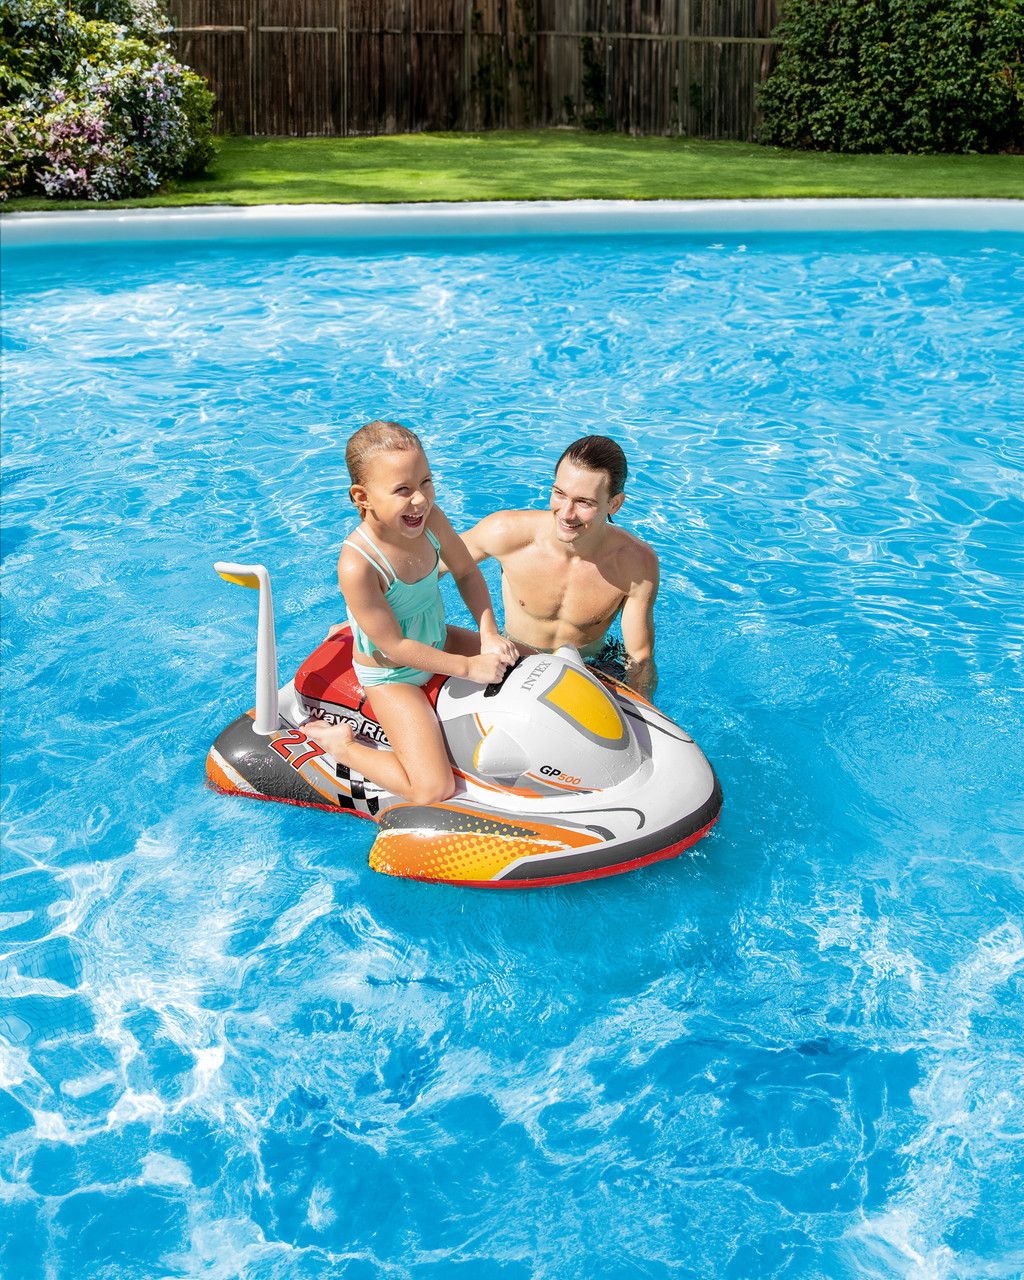 INTEX Wave Rider Ride-On Inflatable Pool Float